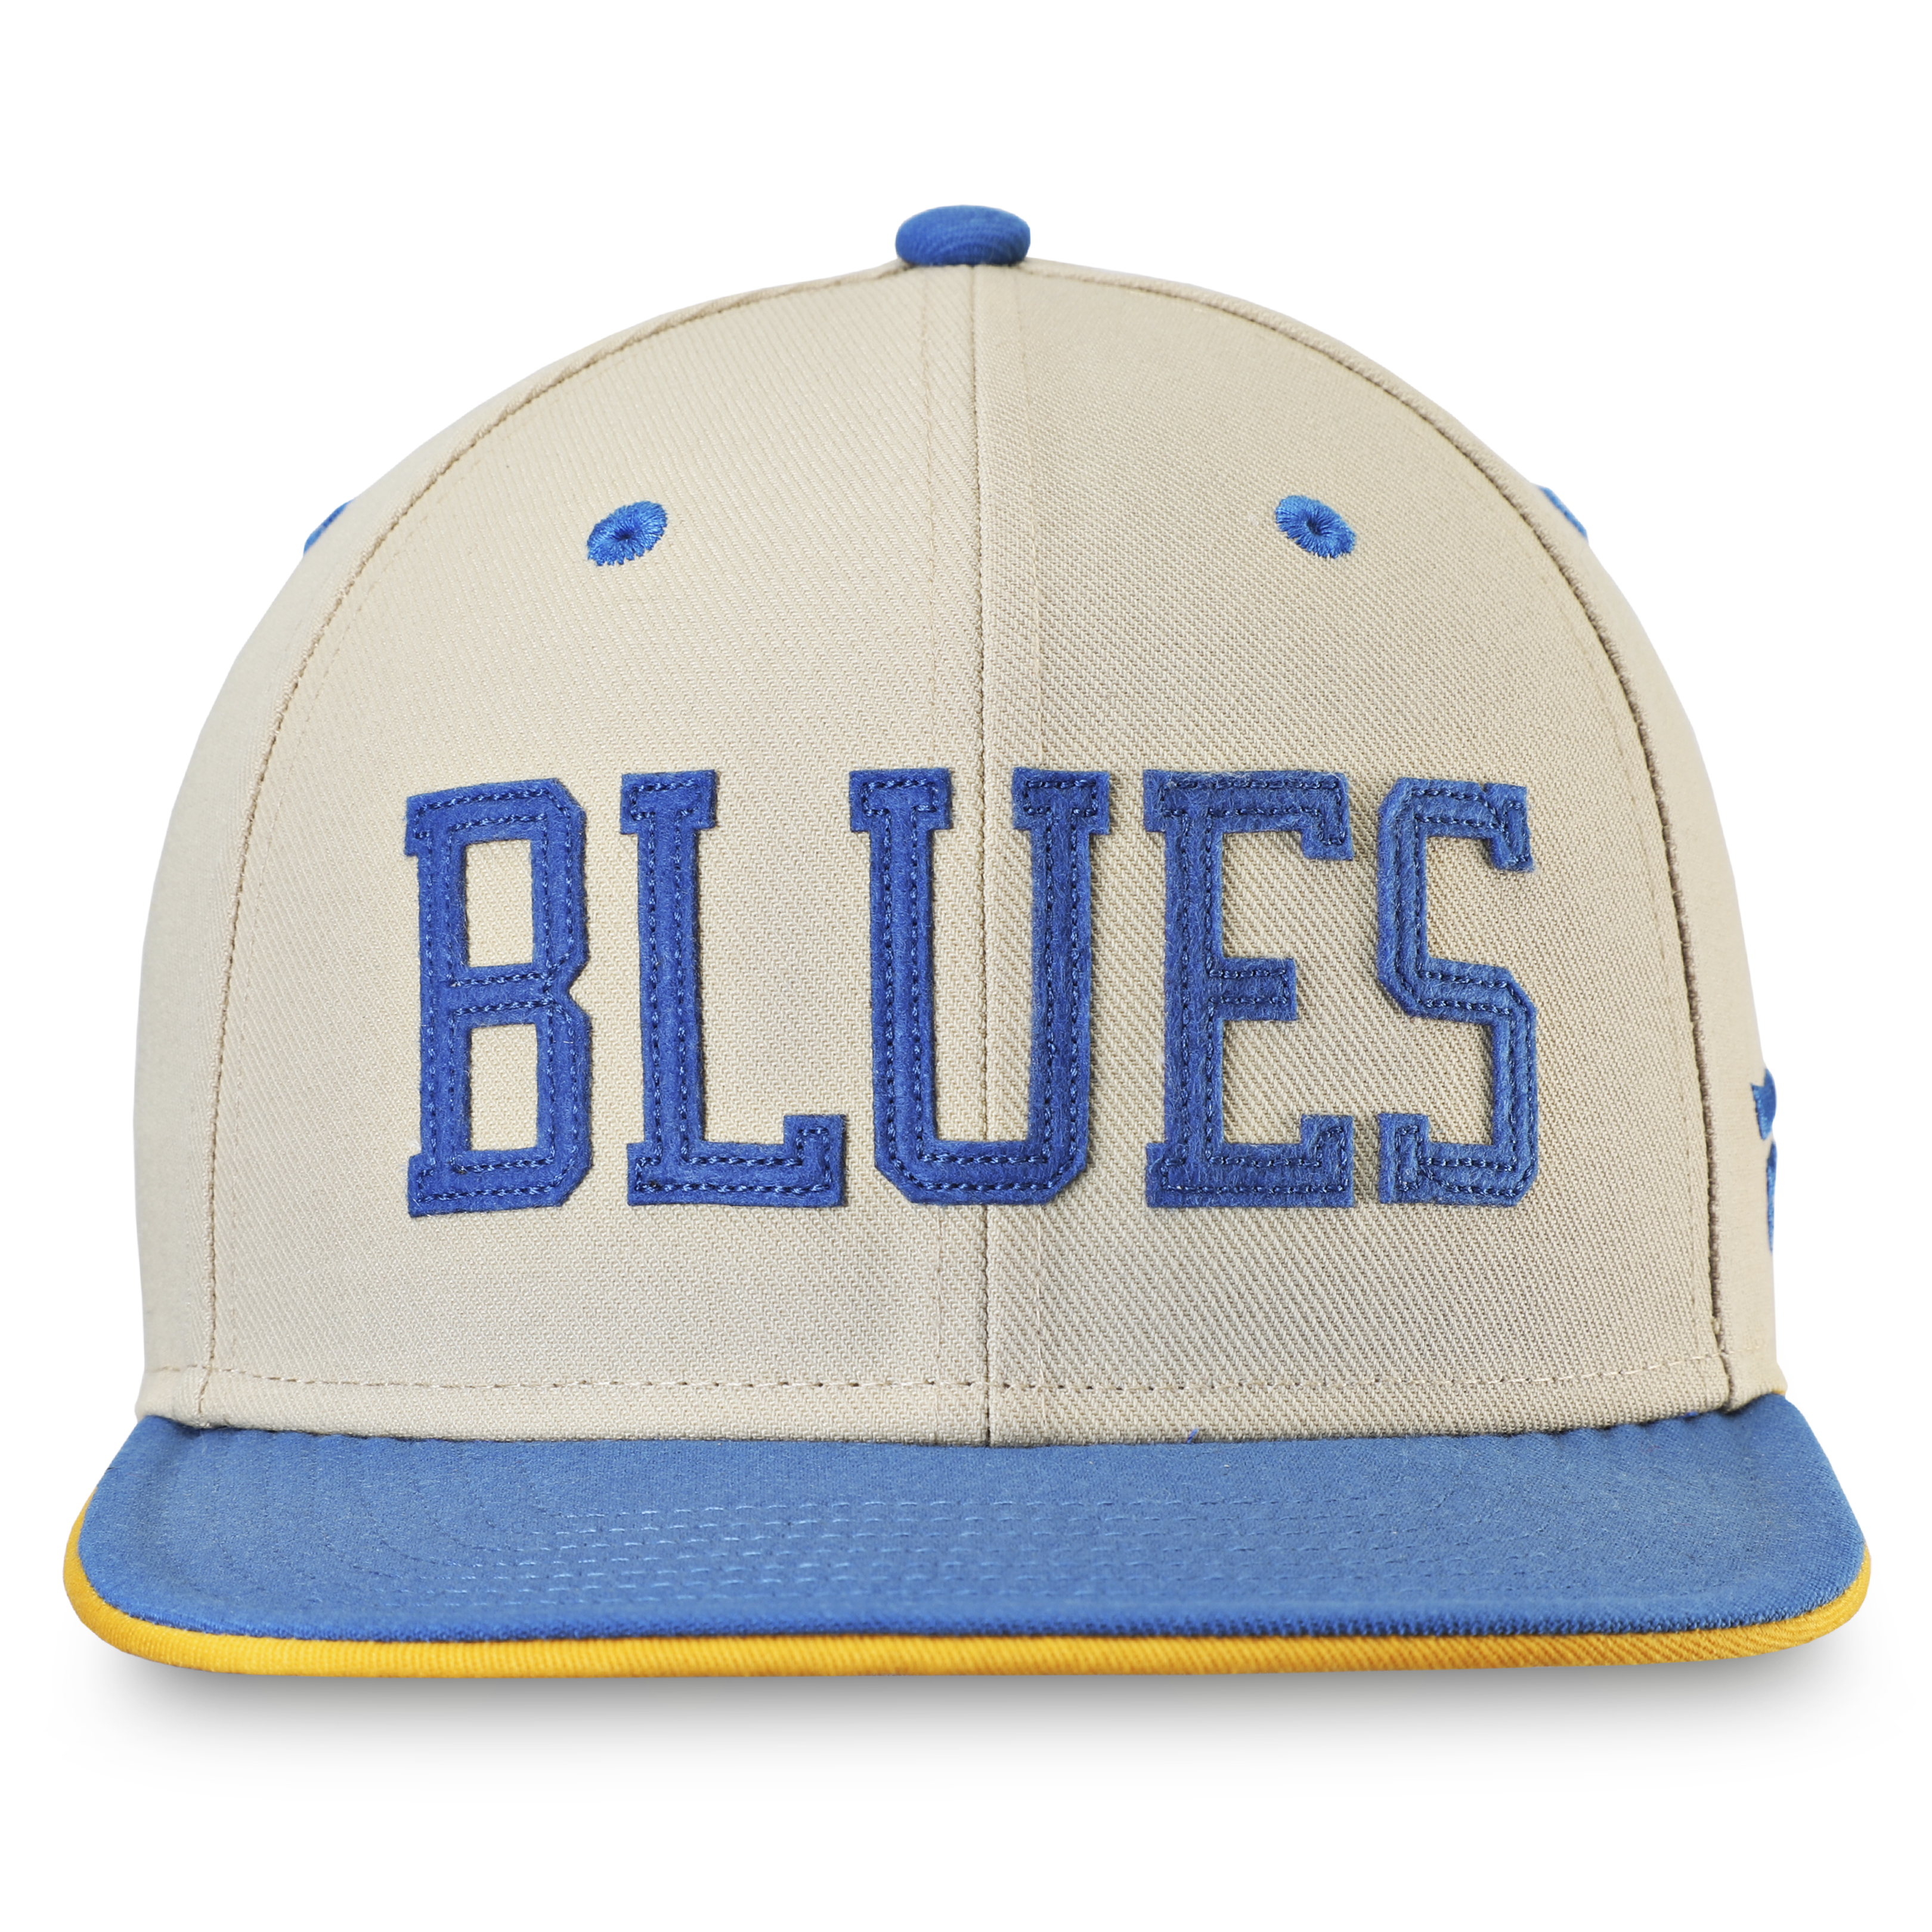 St. Louis Blues Team 2 Tone Mitchell & Ness NHL Adjustable Snapback Ha –  Cowing Robards Sports